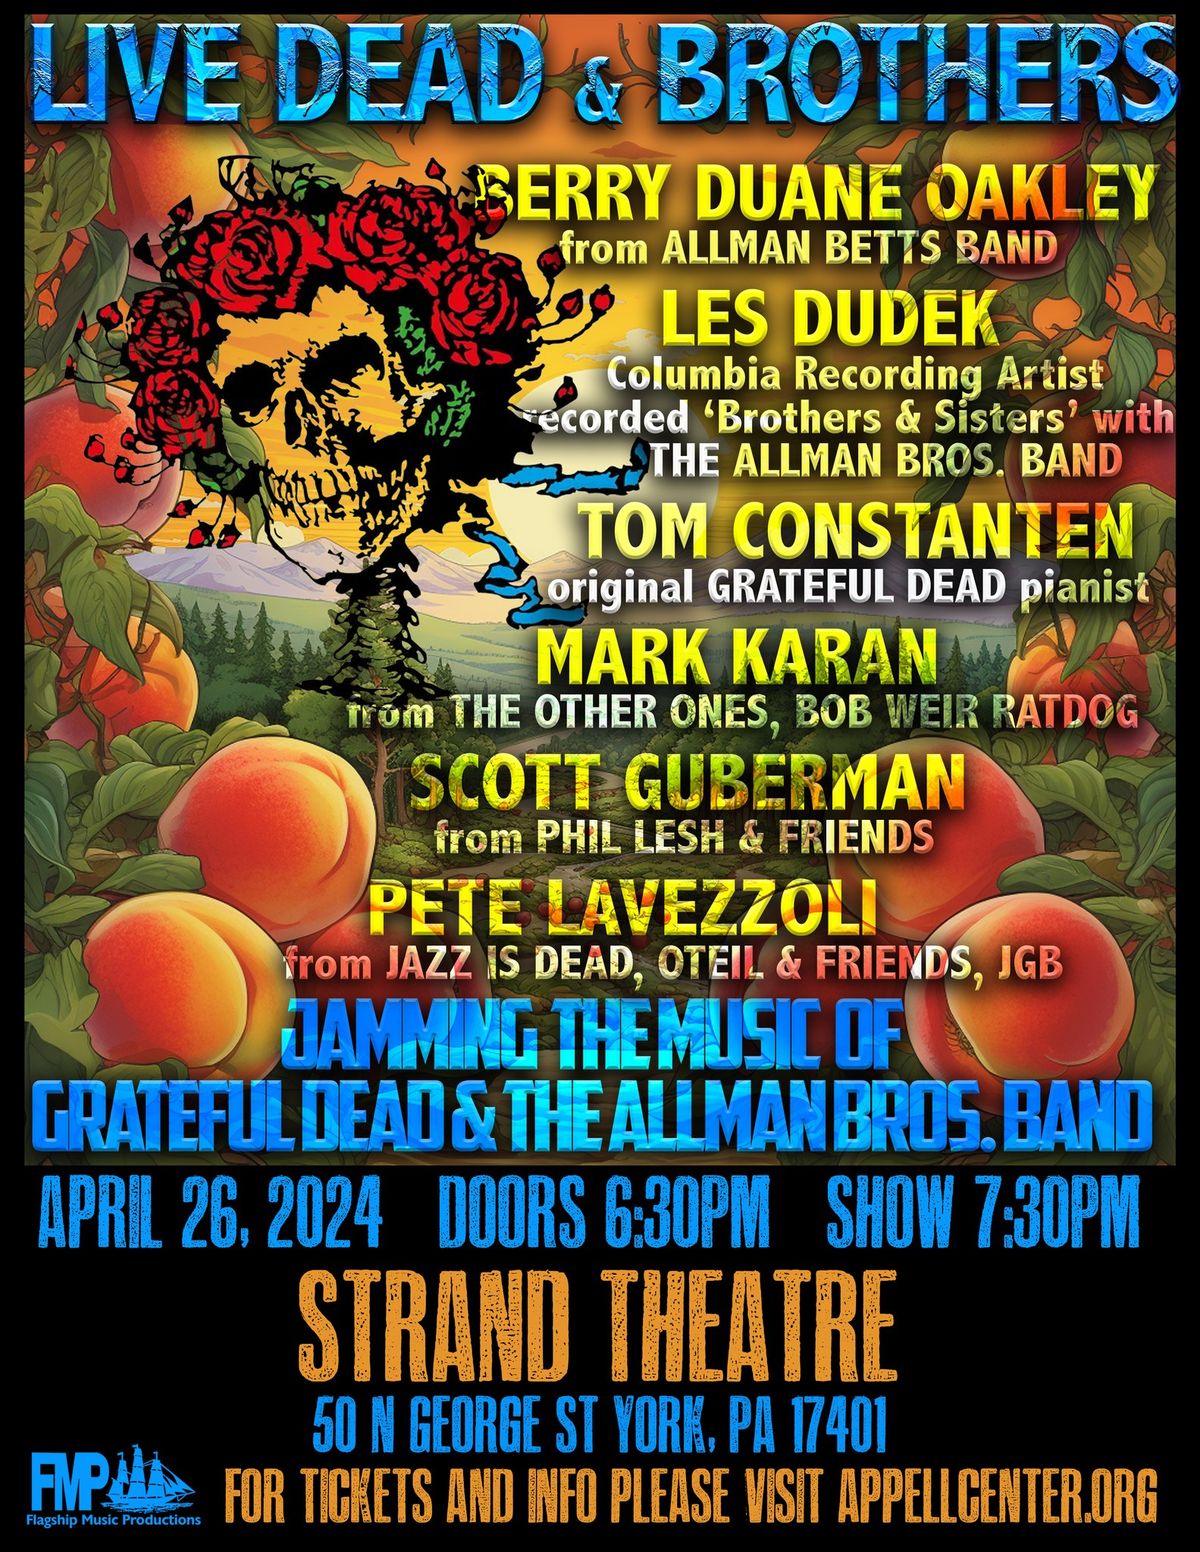  Live Dead & Brothers: An All-Star Celebration of Grateful Dead & Allman Brothers